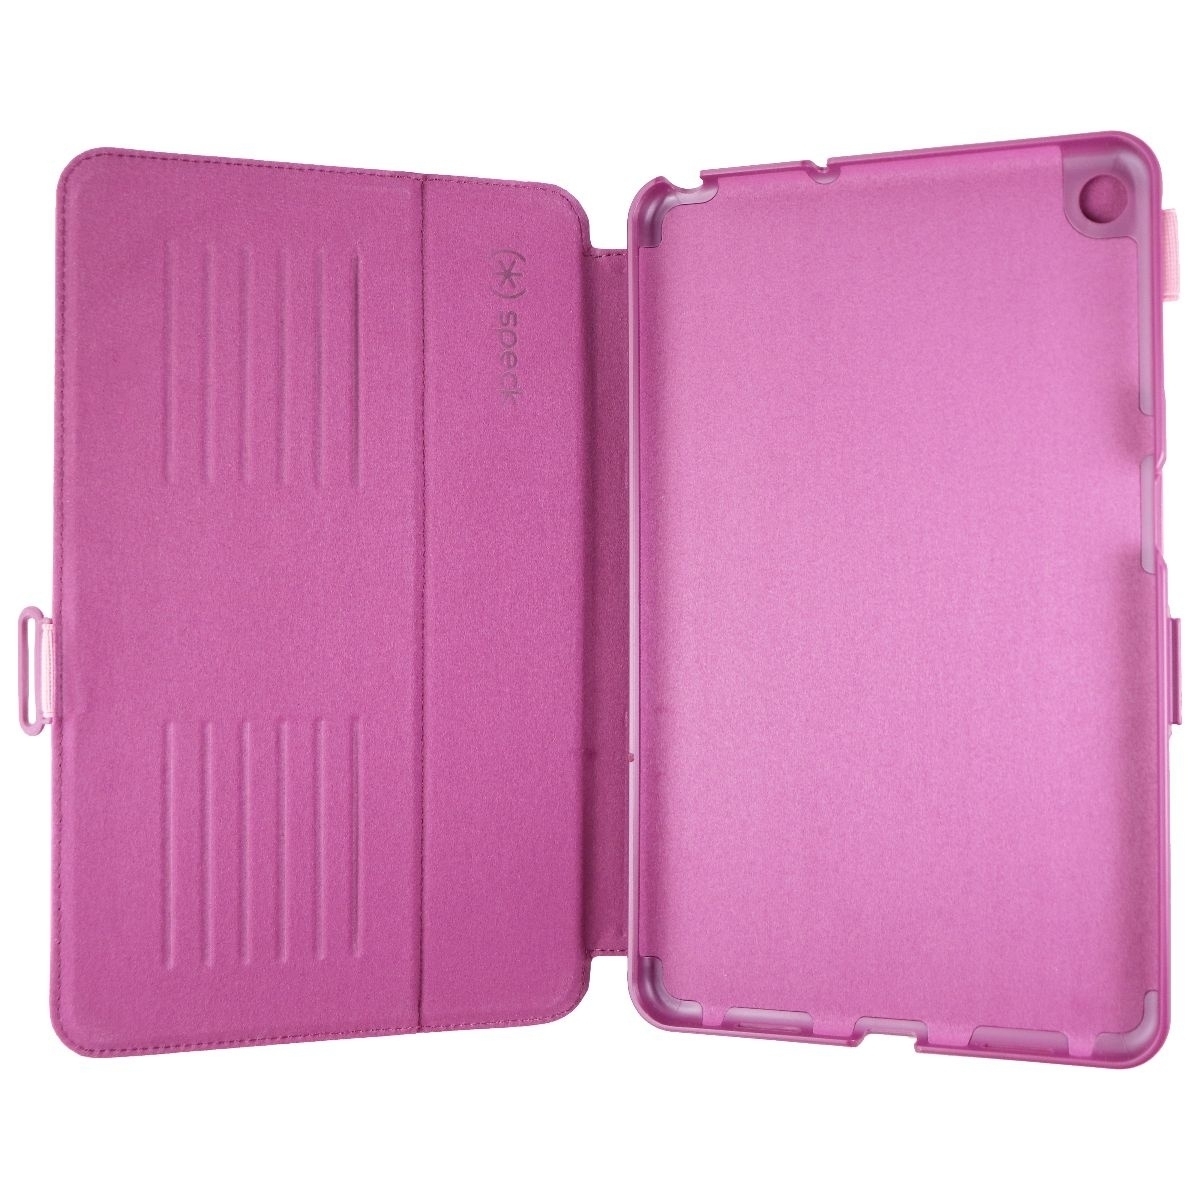 Speck Balance Folio Case & Stand For LG G Pad 5 (10.1 FHD) - Pink